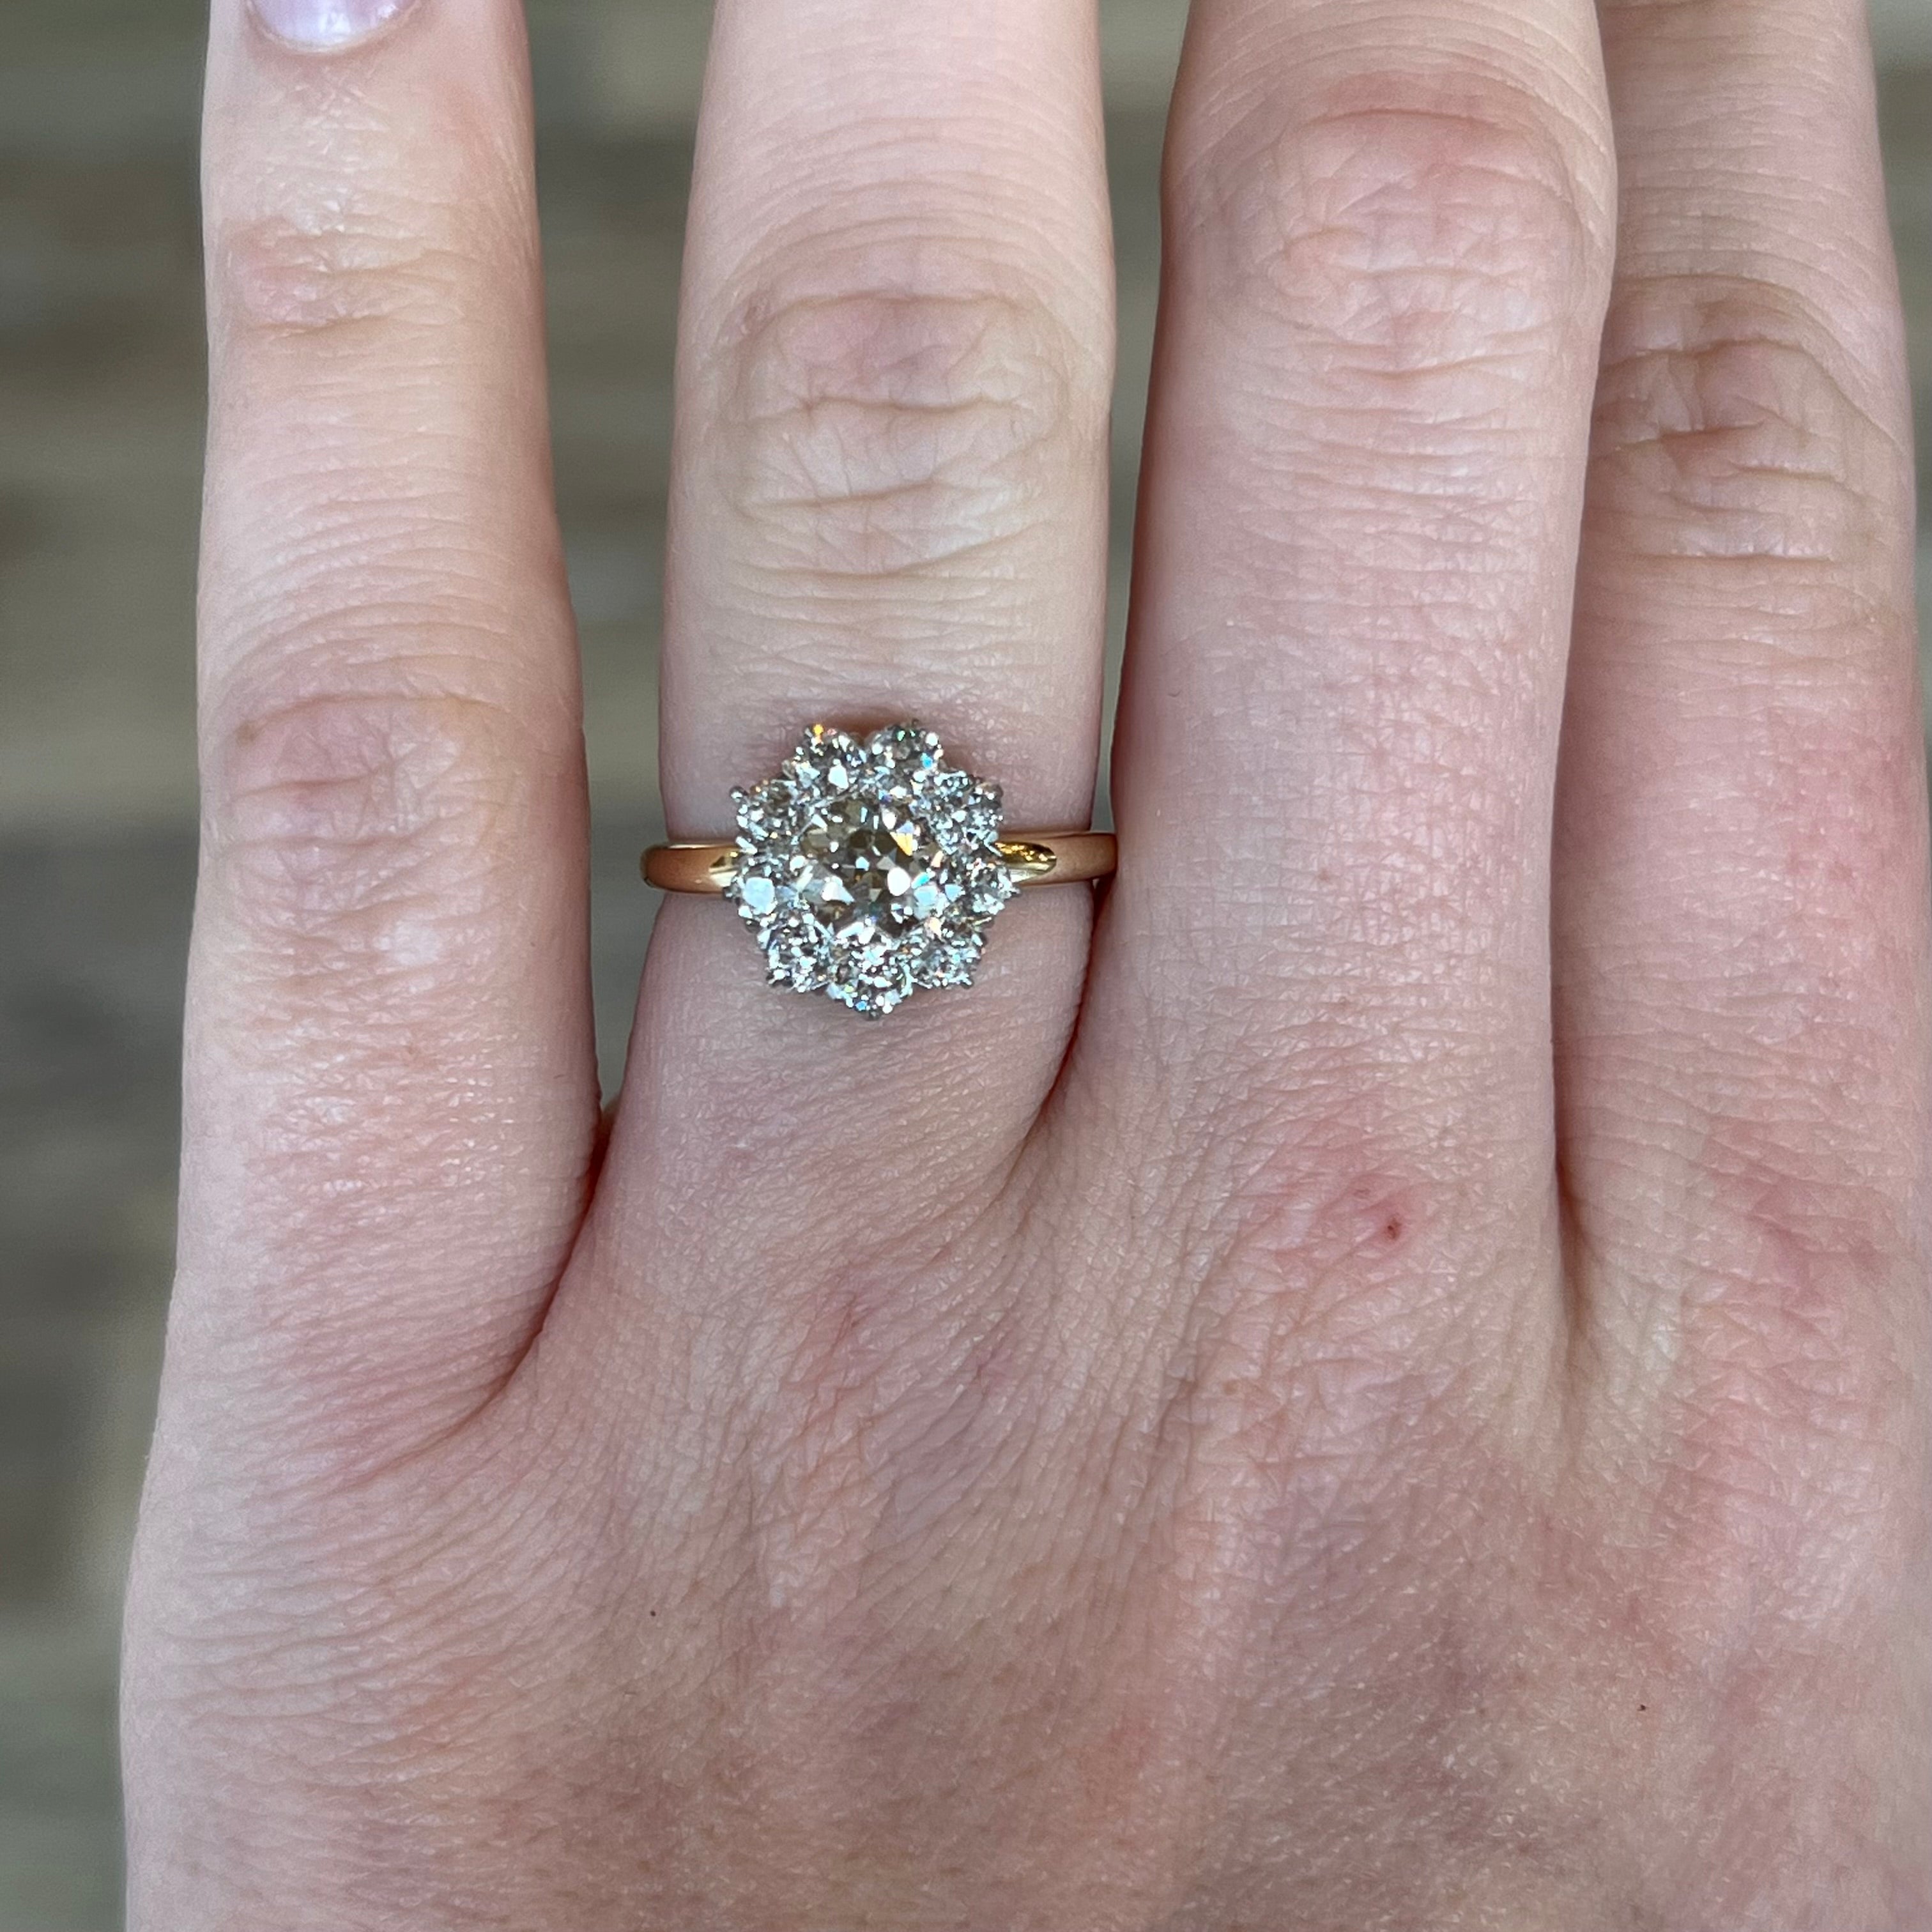 55 Vintage and Antique Engagement Ring Ideas - Oldest.org